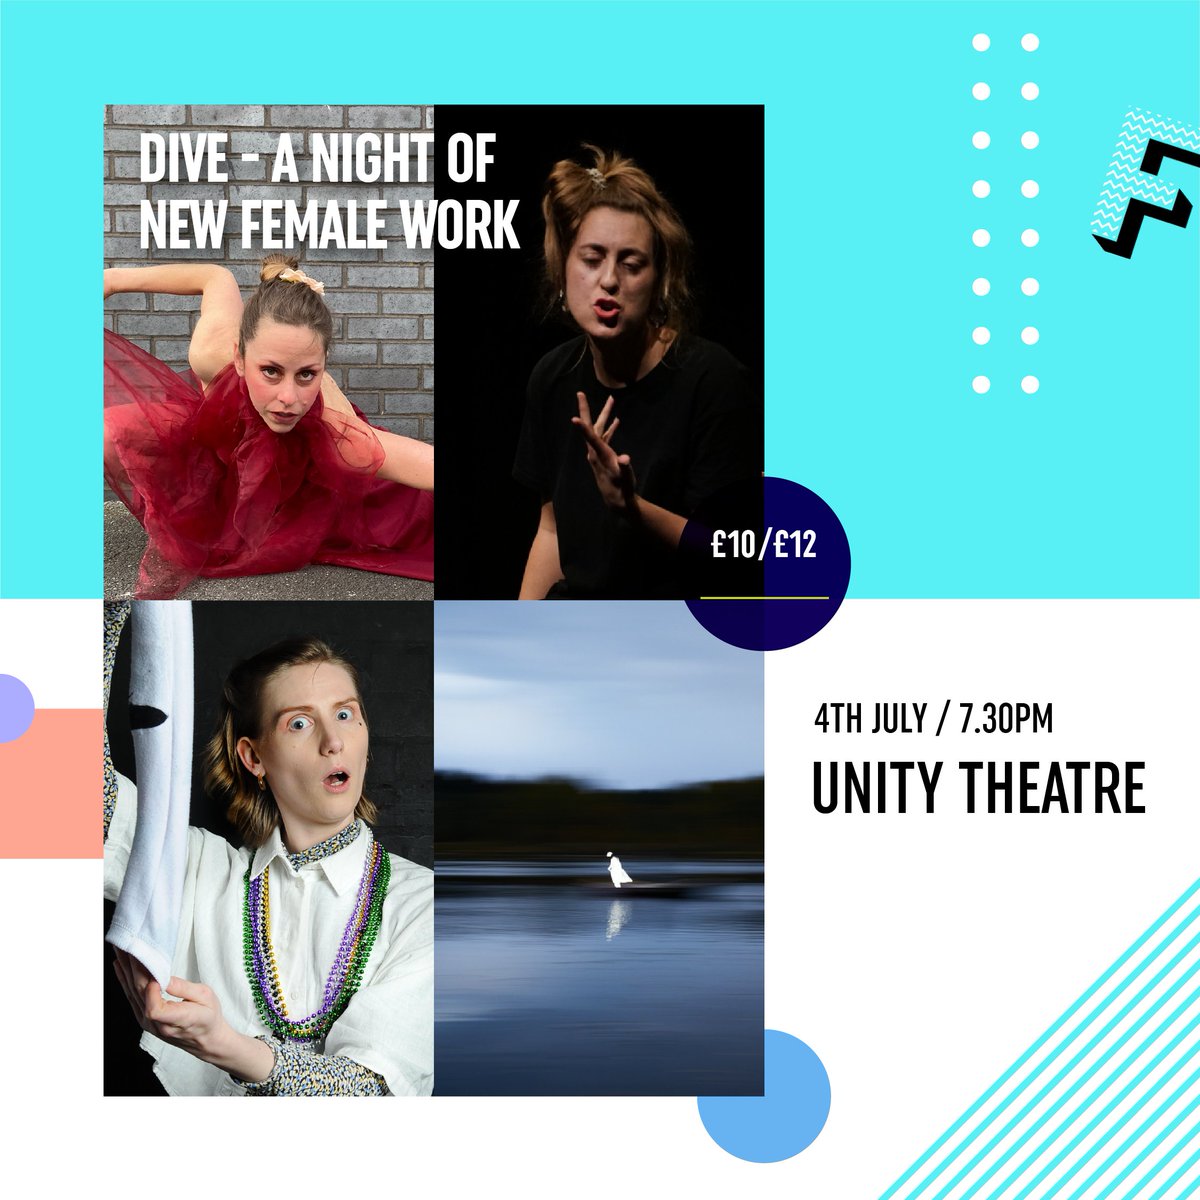 DIVE  a night of new female work @unitytheatre 4 short pieces- 1 night! With @alinecostadance @doracolquhoun @natsbellino & @LIPALiverpool Grad Alice Way! #ACEsupported @cultureliverpool
unitytheatreliverpool.co.uk/whats-on/dive-…